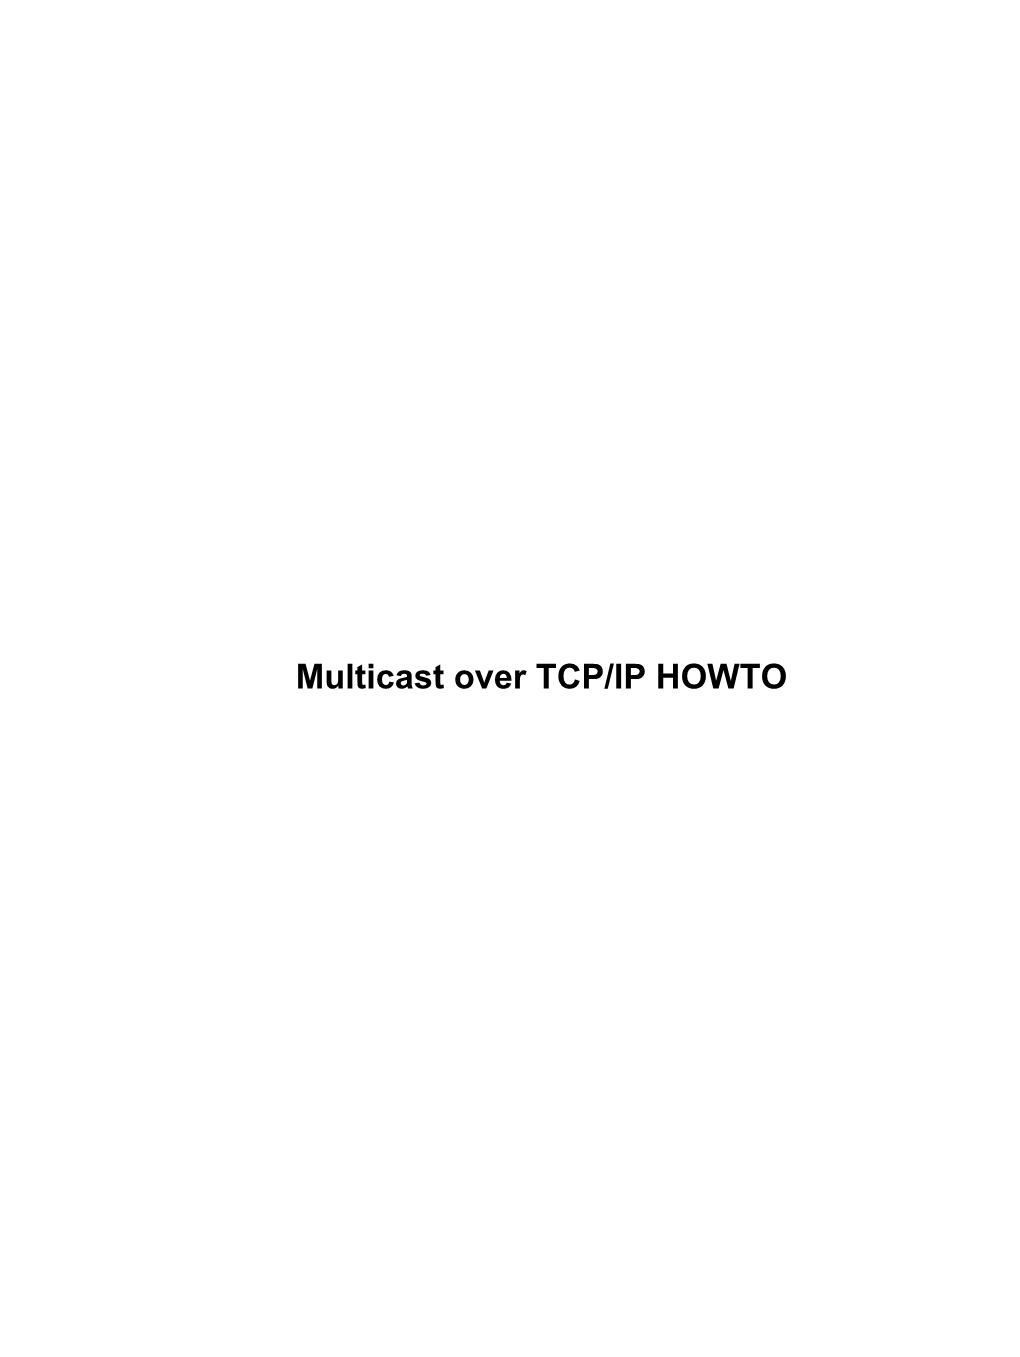 Multicast Over TCP/IP HOWTO Multicast Over TCP/IP HOWTO